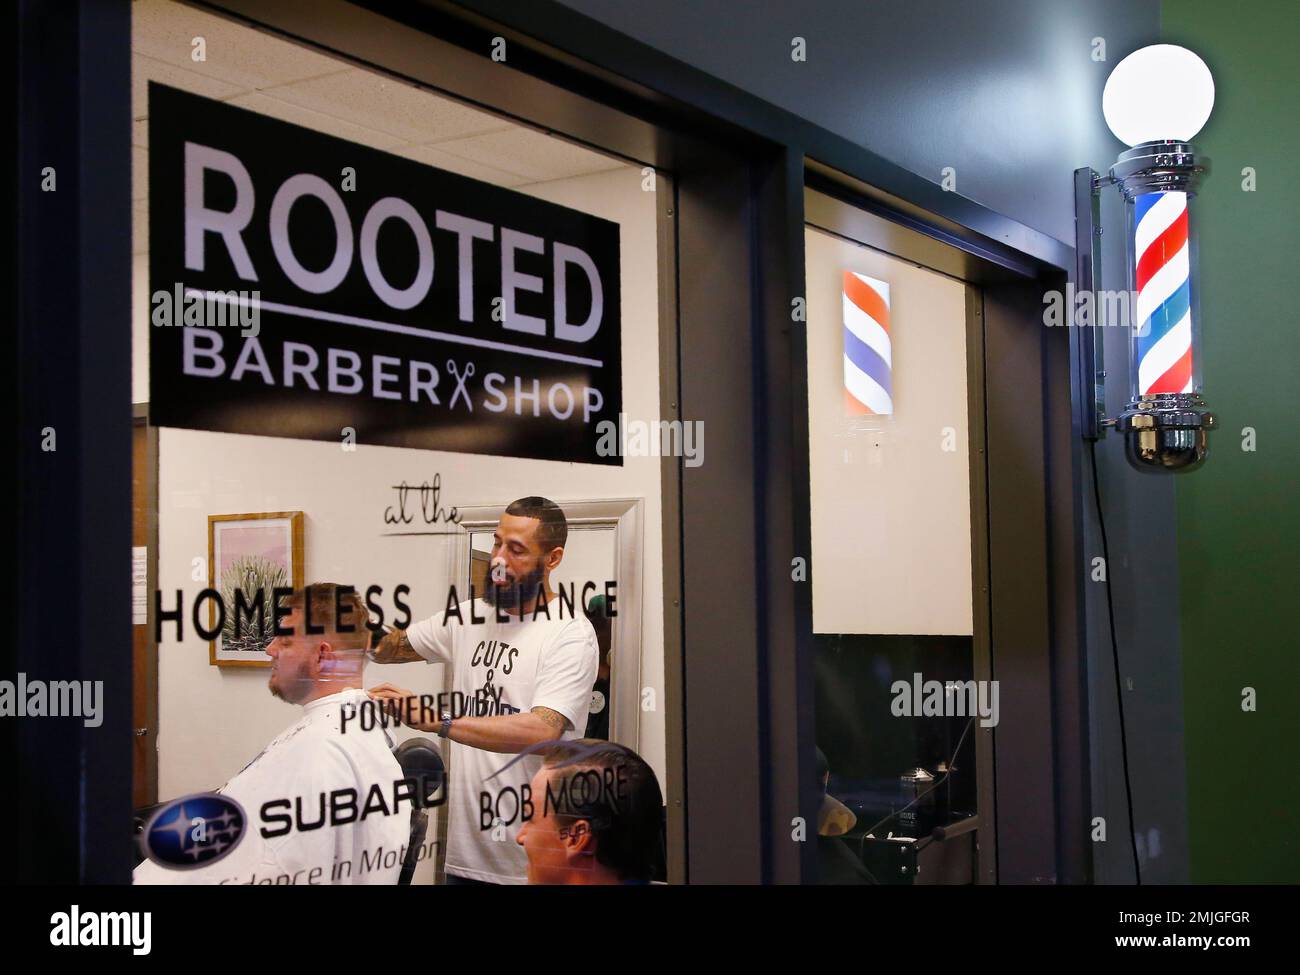 Bruce Waight, right, owner of Rooted Barber + Shop, works on client Larry  Guinn, left, on opening day at his new location at the Homeless Alliance  Day Shelter Monday, July 22, 2019,